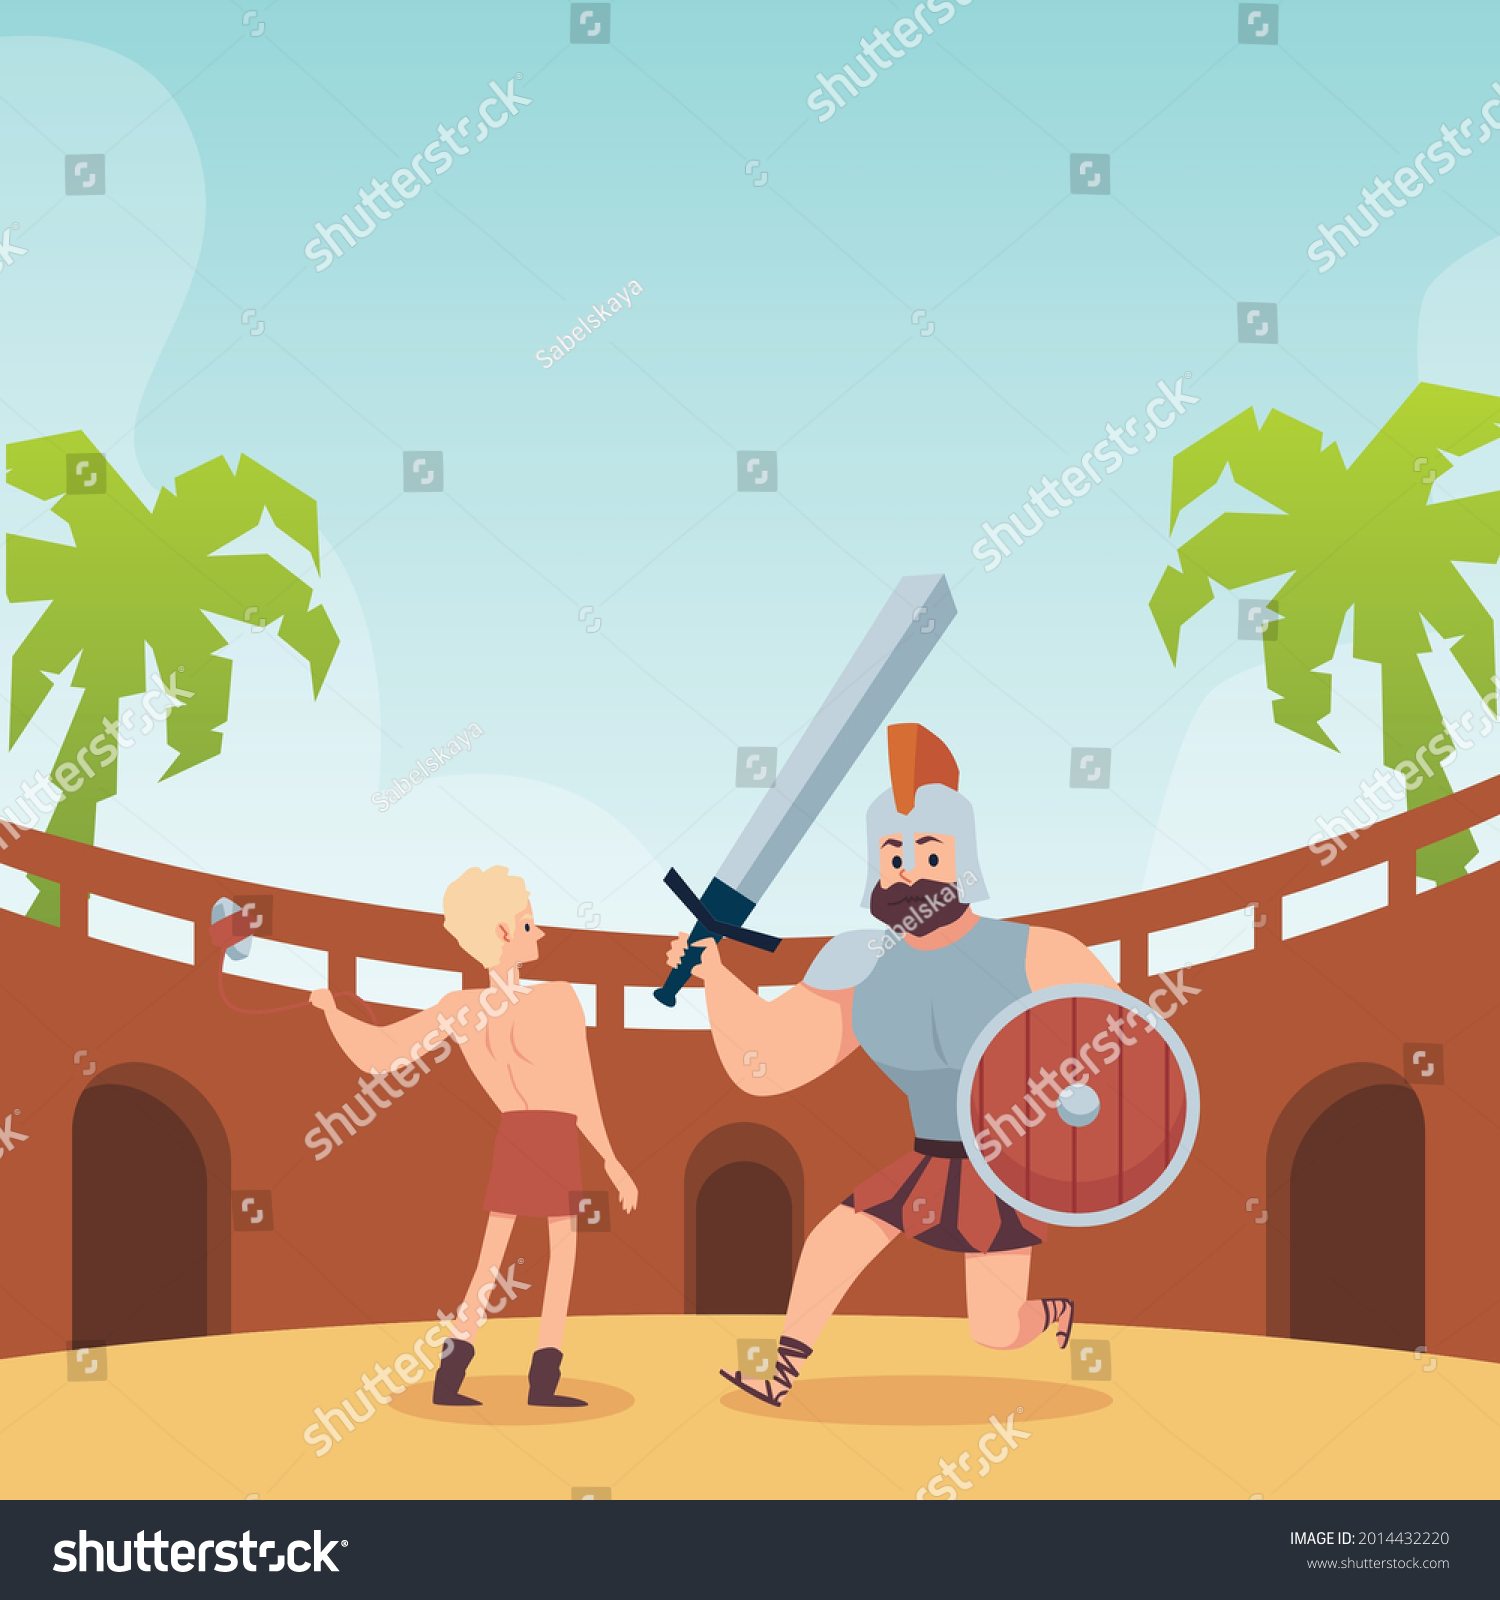 13 Victory over giant battles Images, Stock Photos & Vectors | Shutterstock